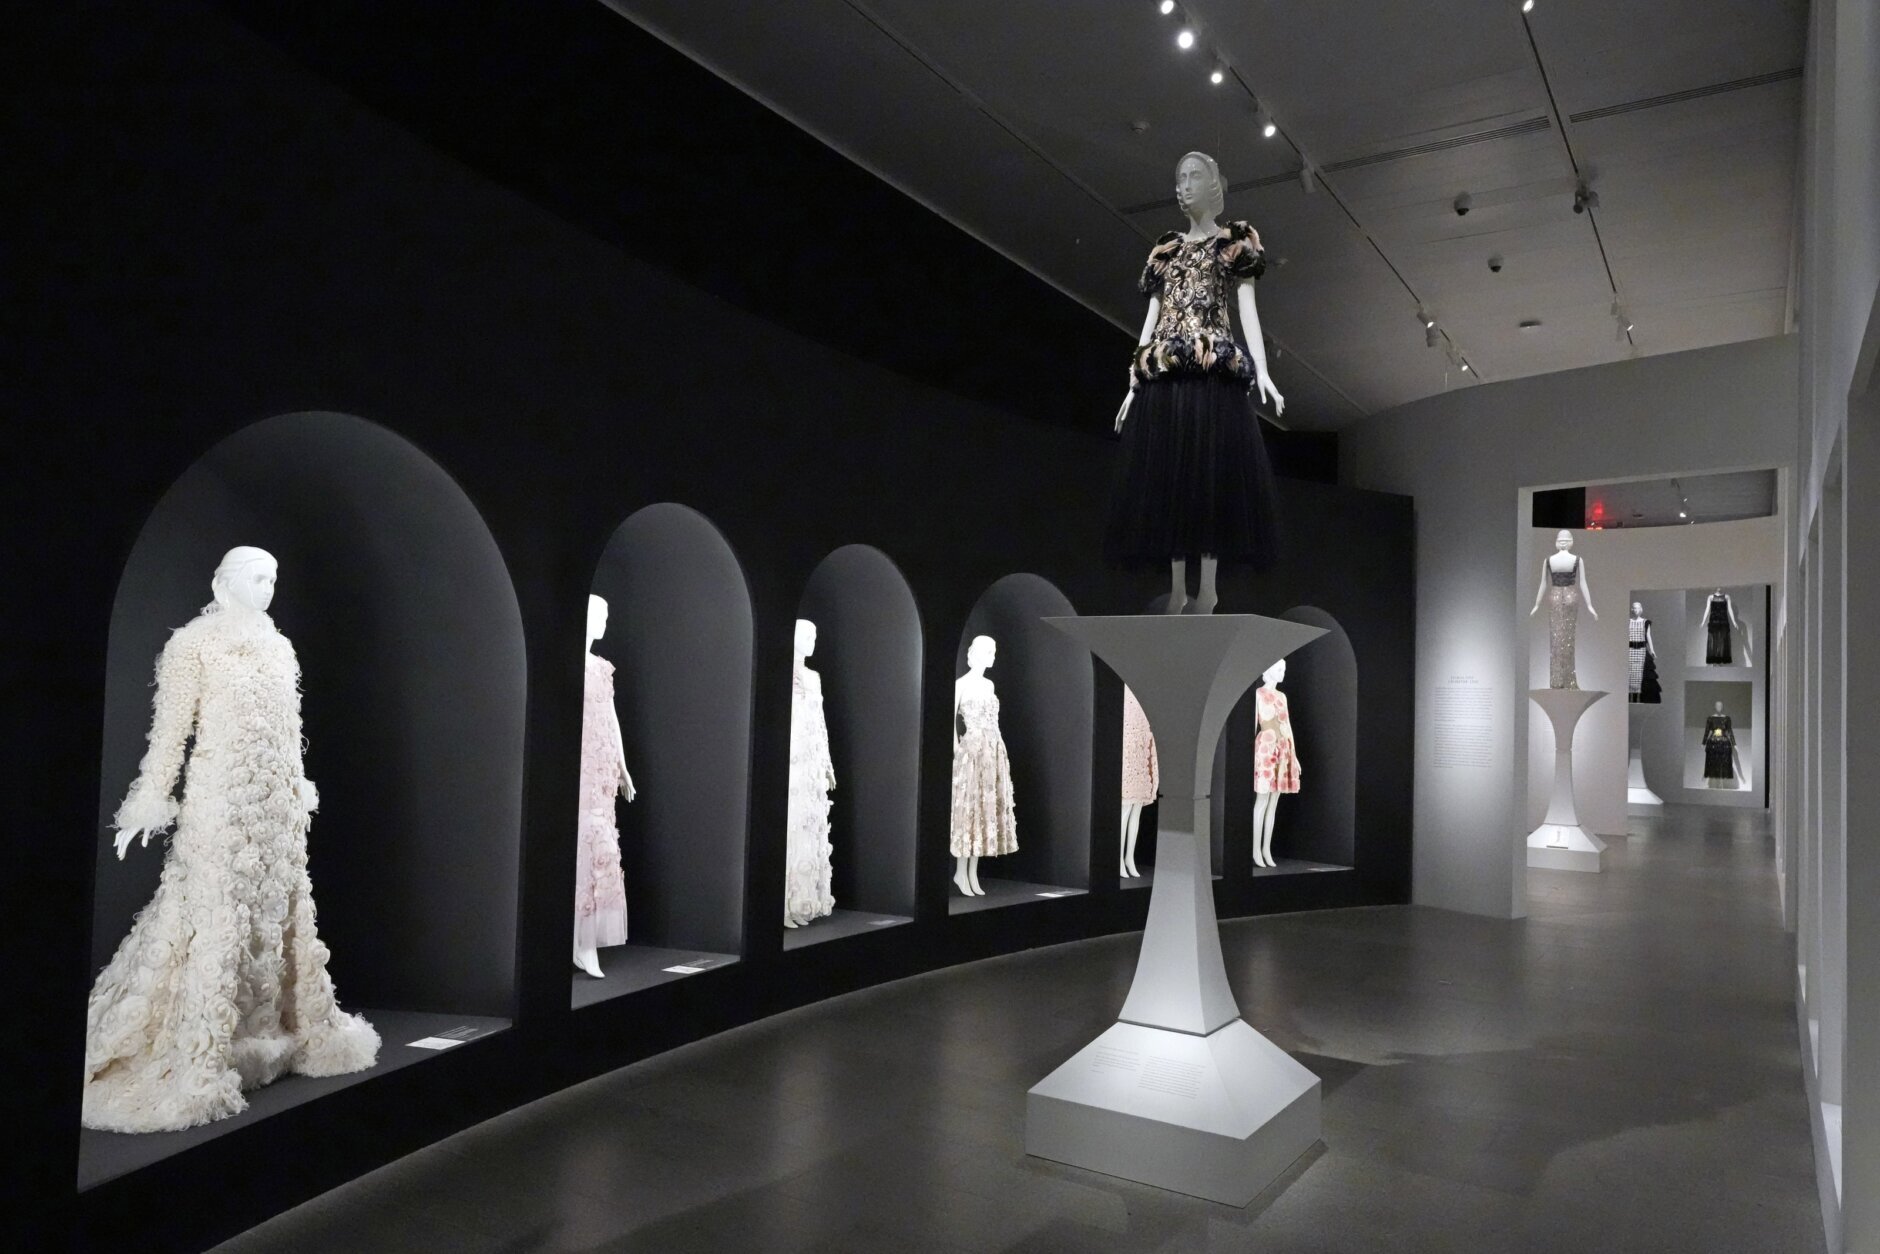 Karl Lagerfeld: A Line of Beauty' Attempts to Separate the Art